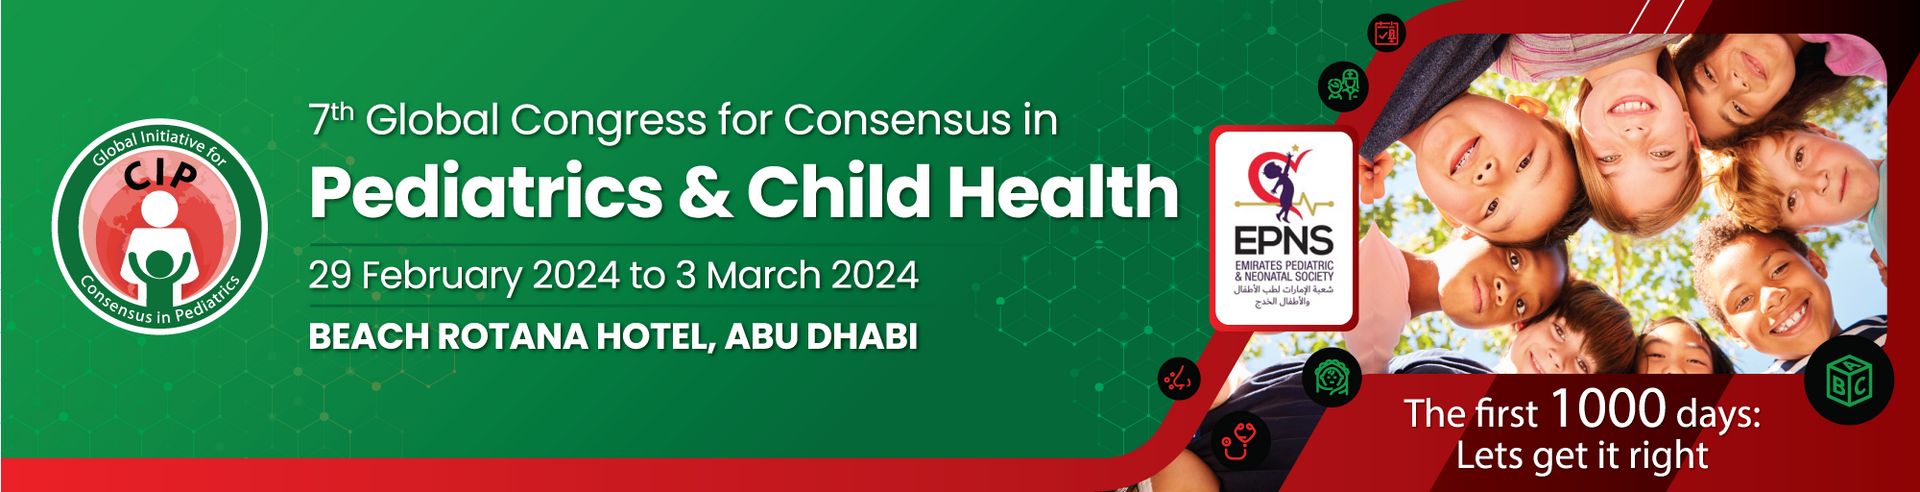 CIP 2024 - 7th Global Congress for Consensus in Pediatrics and Child Health